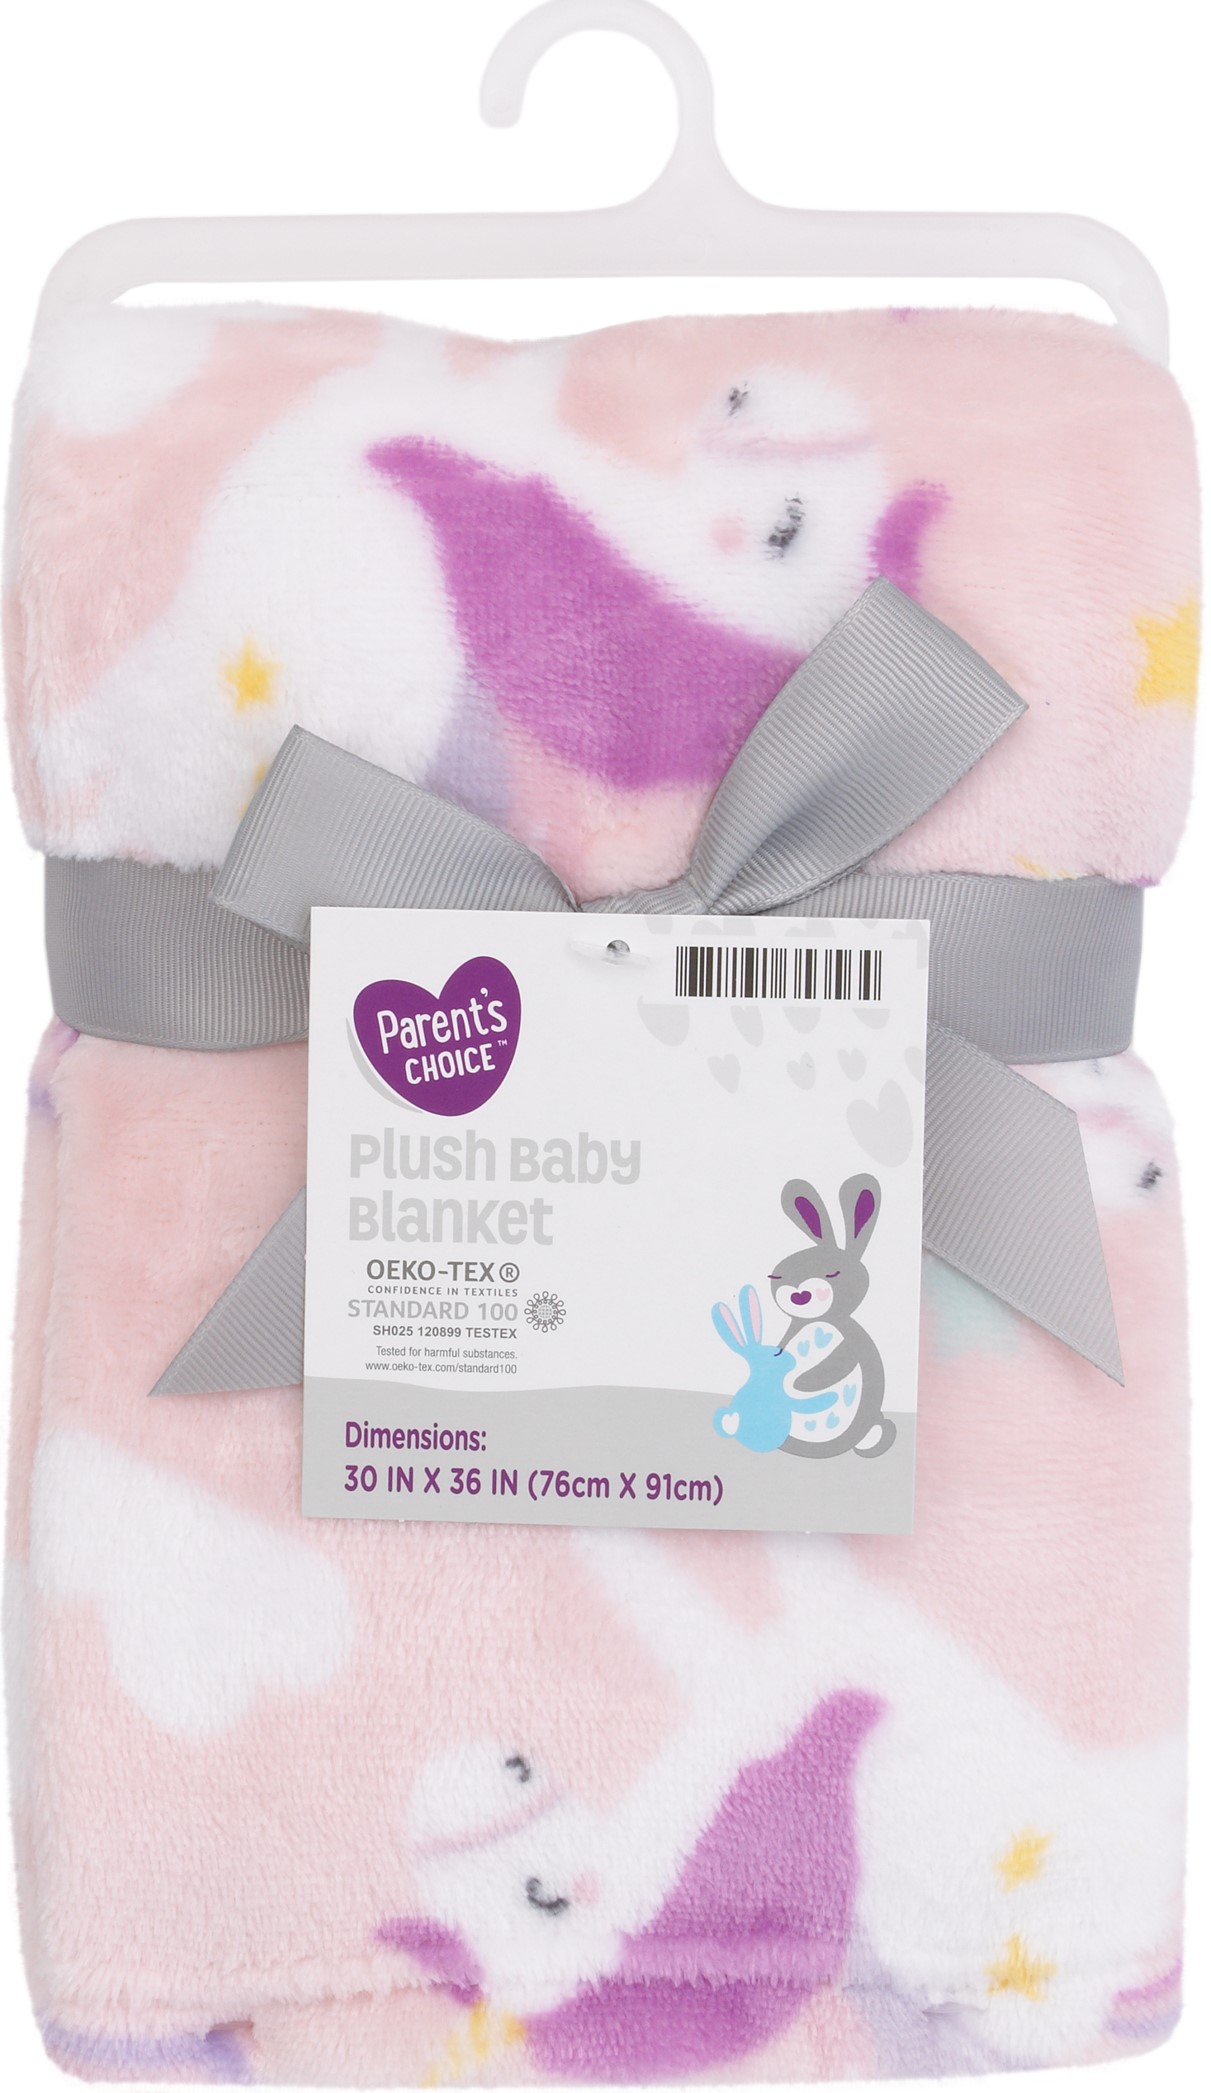 Parent's Choice Plush Baby Blanket, Pink Unicorn Print, 30x36 inches, Pink, White, Infant Girl - image 1 of 7